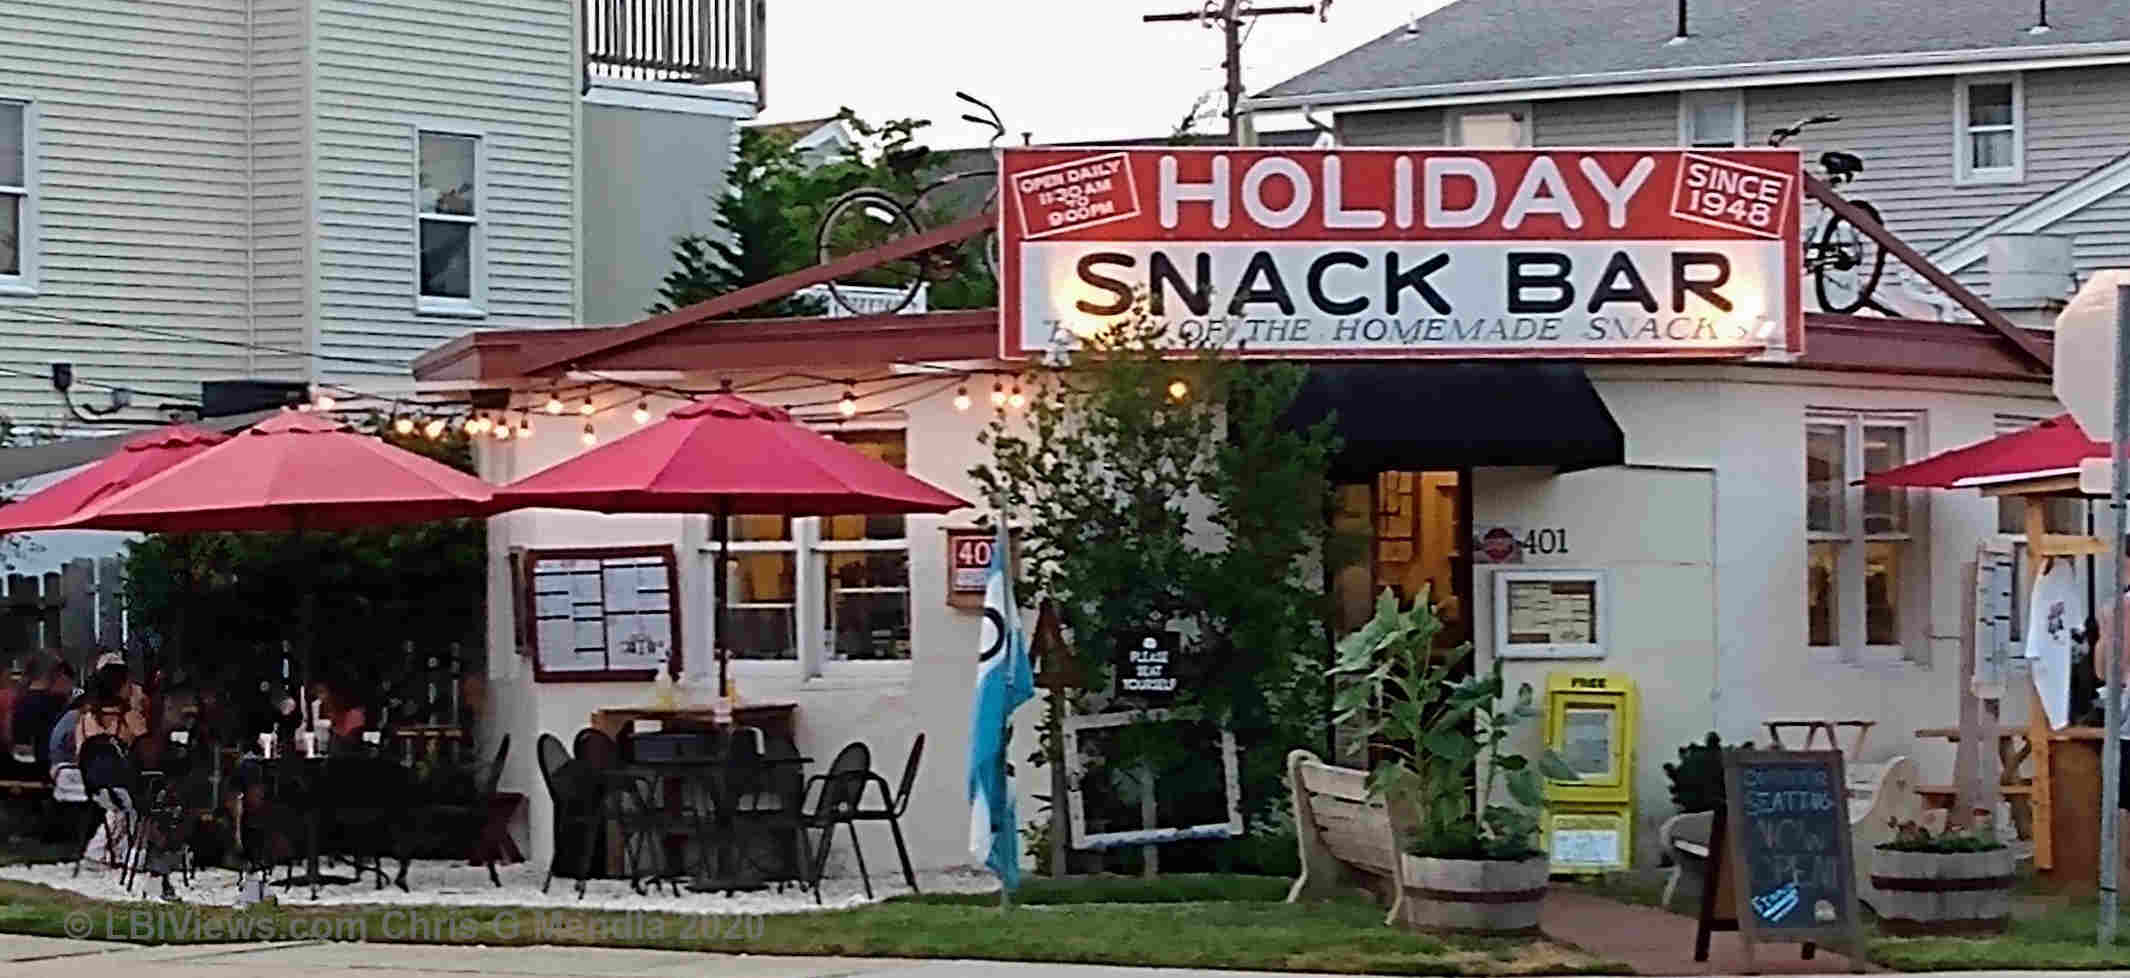 The Holiday Snack Bar in Beach Haven on Long Beach Island